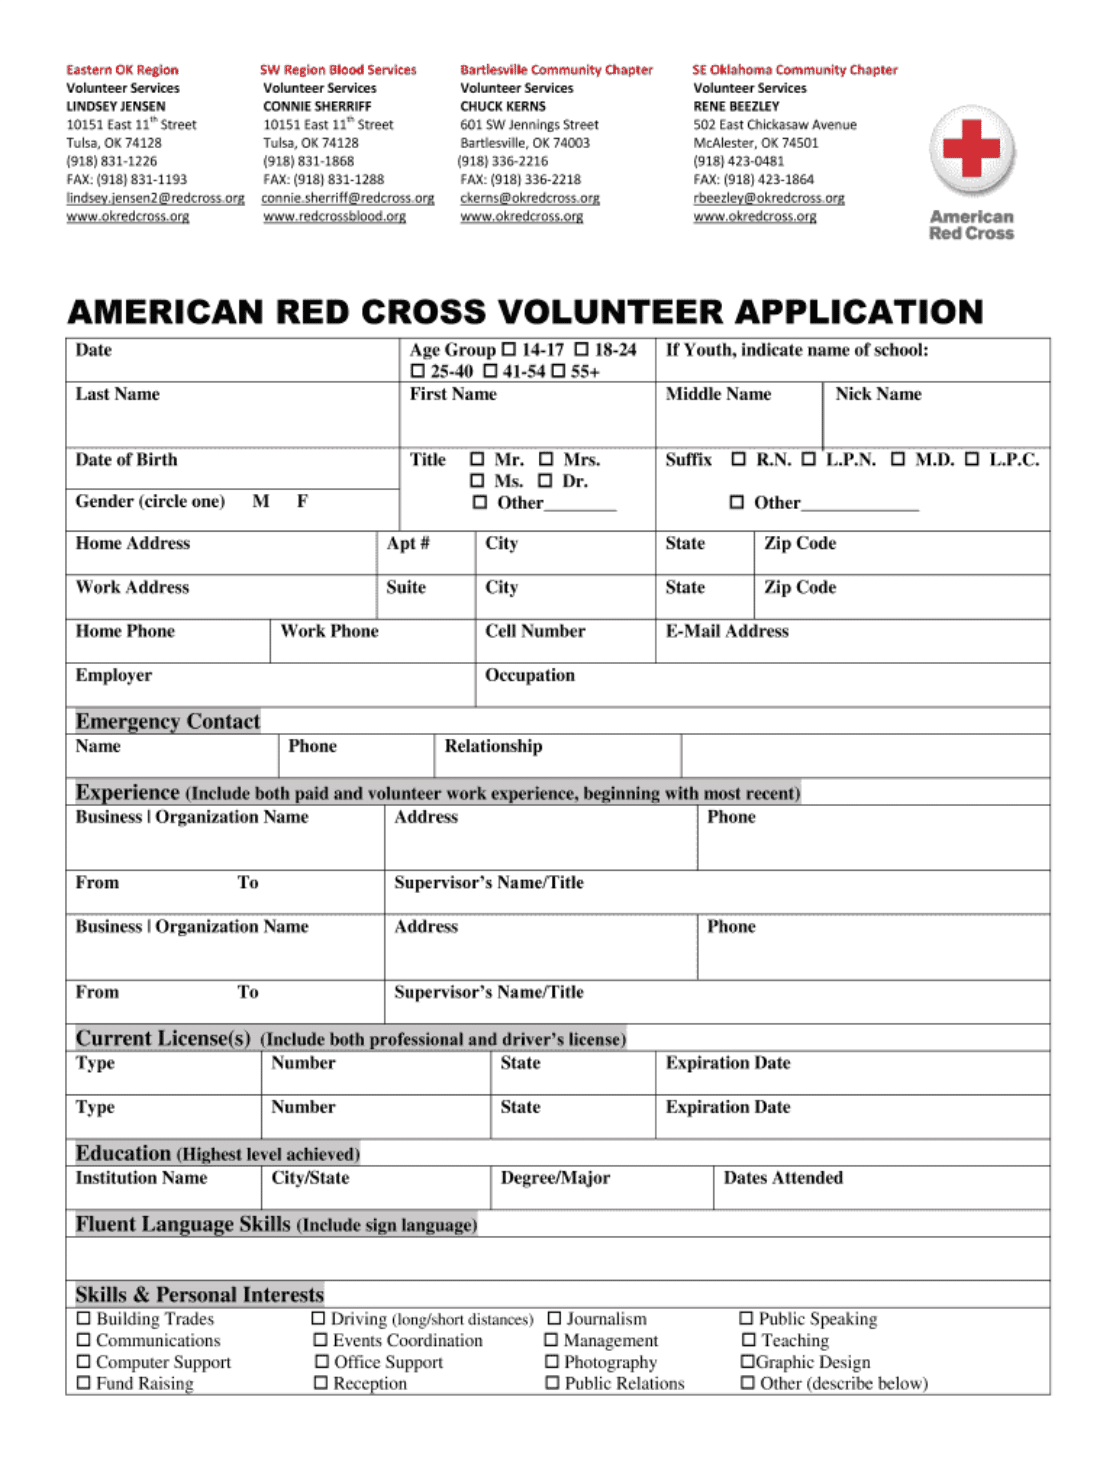 An example of a volunteer recruitment intake form for an non-profit organization